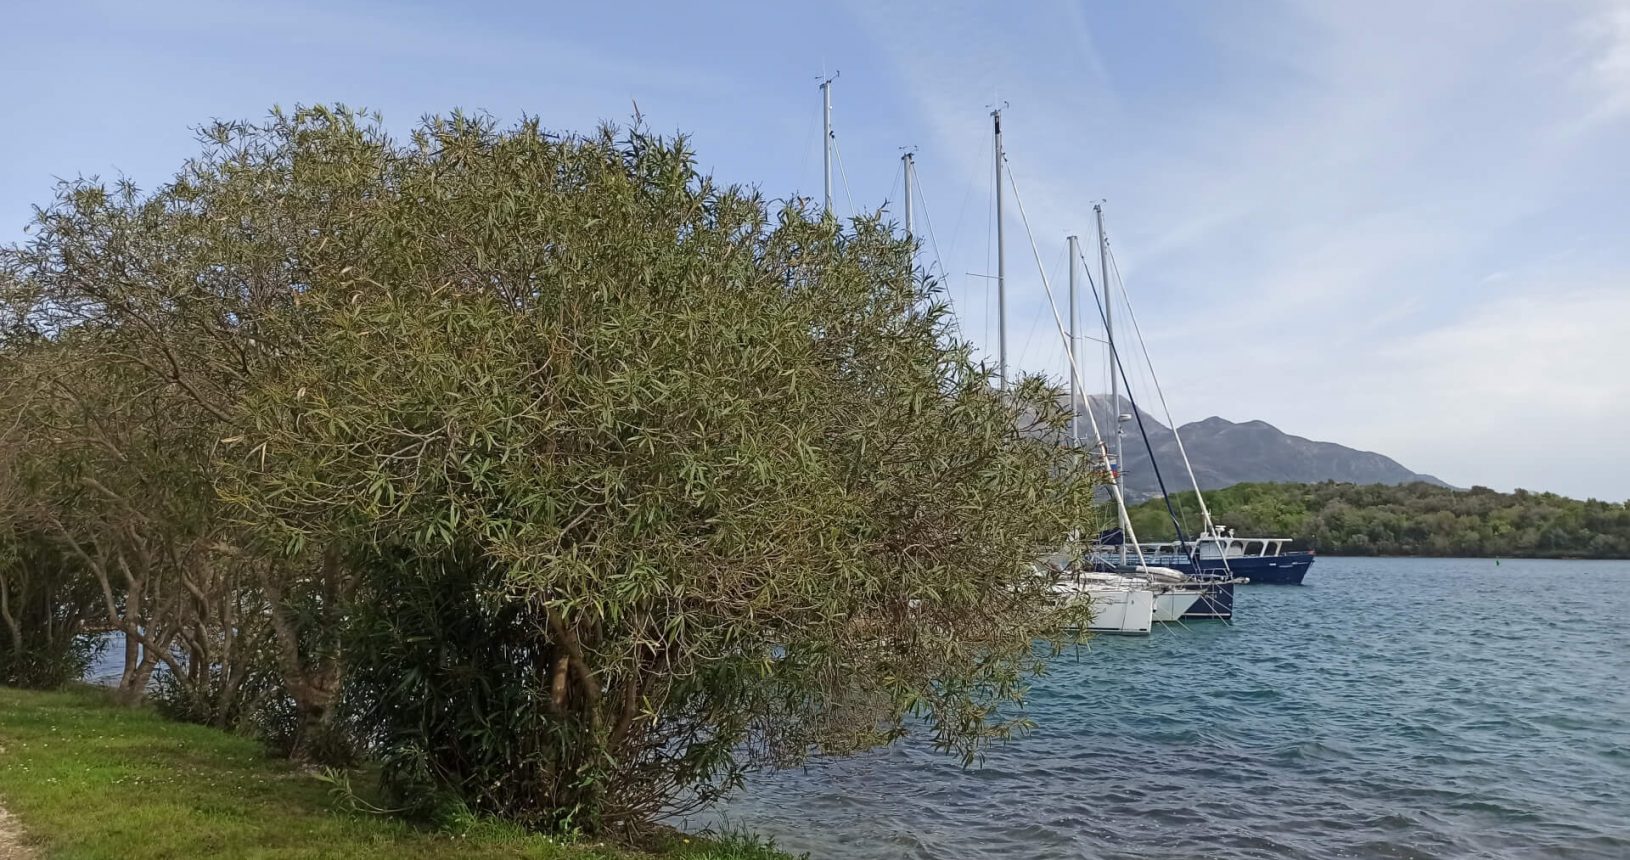 Yachts behind the trees. The island of flowers